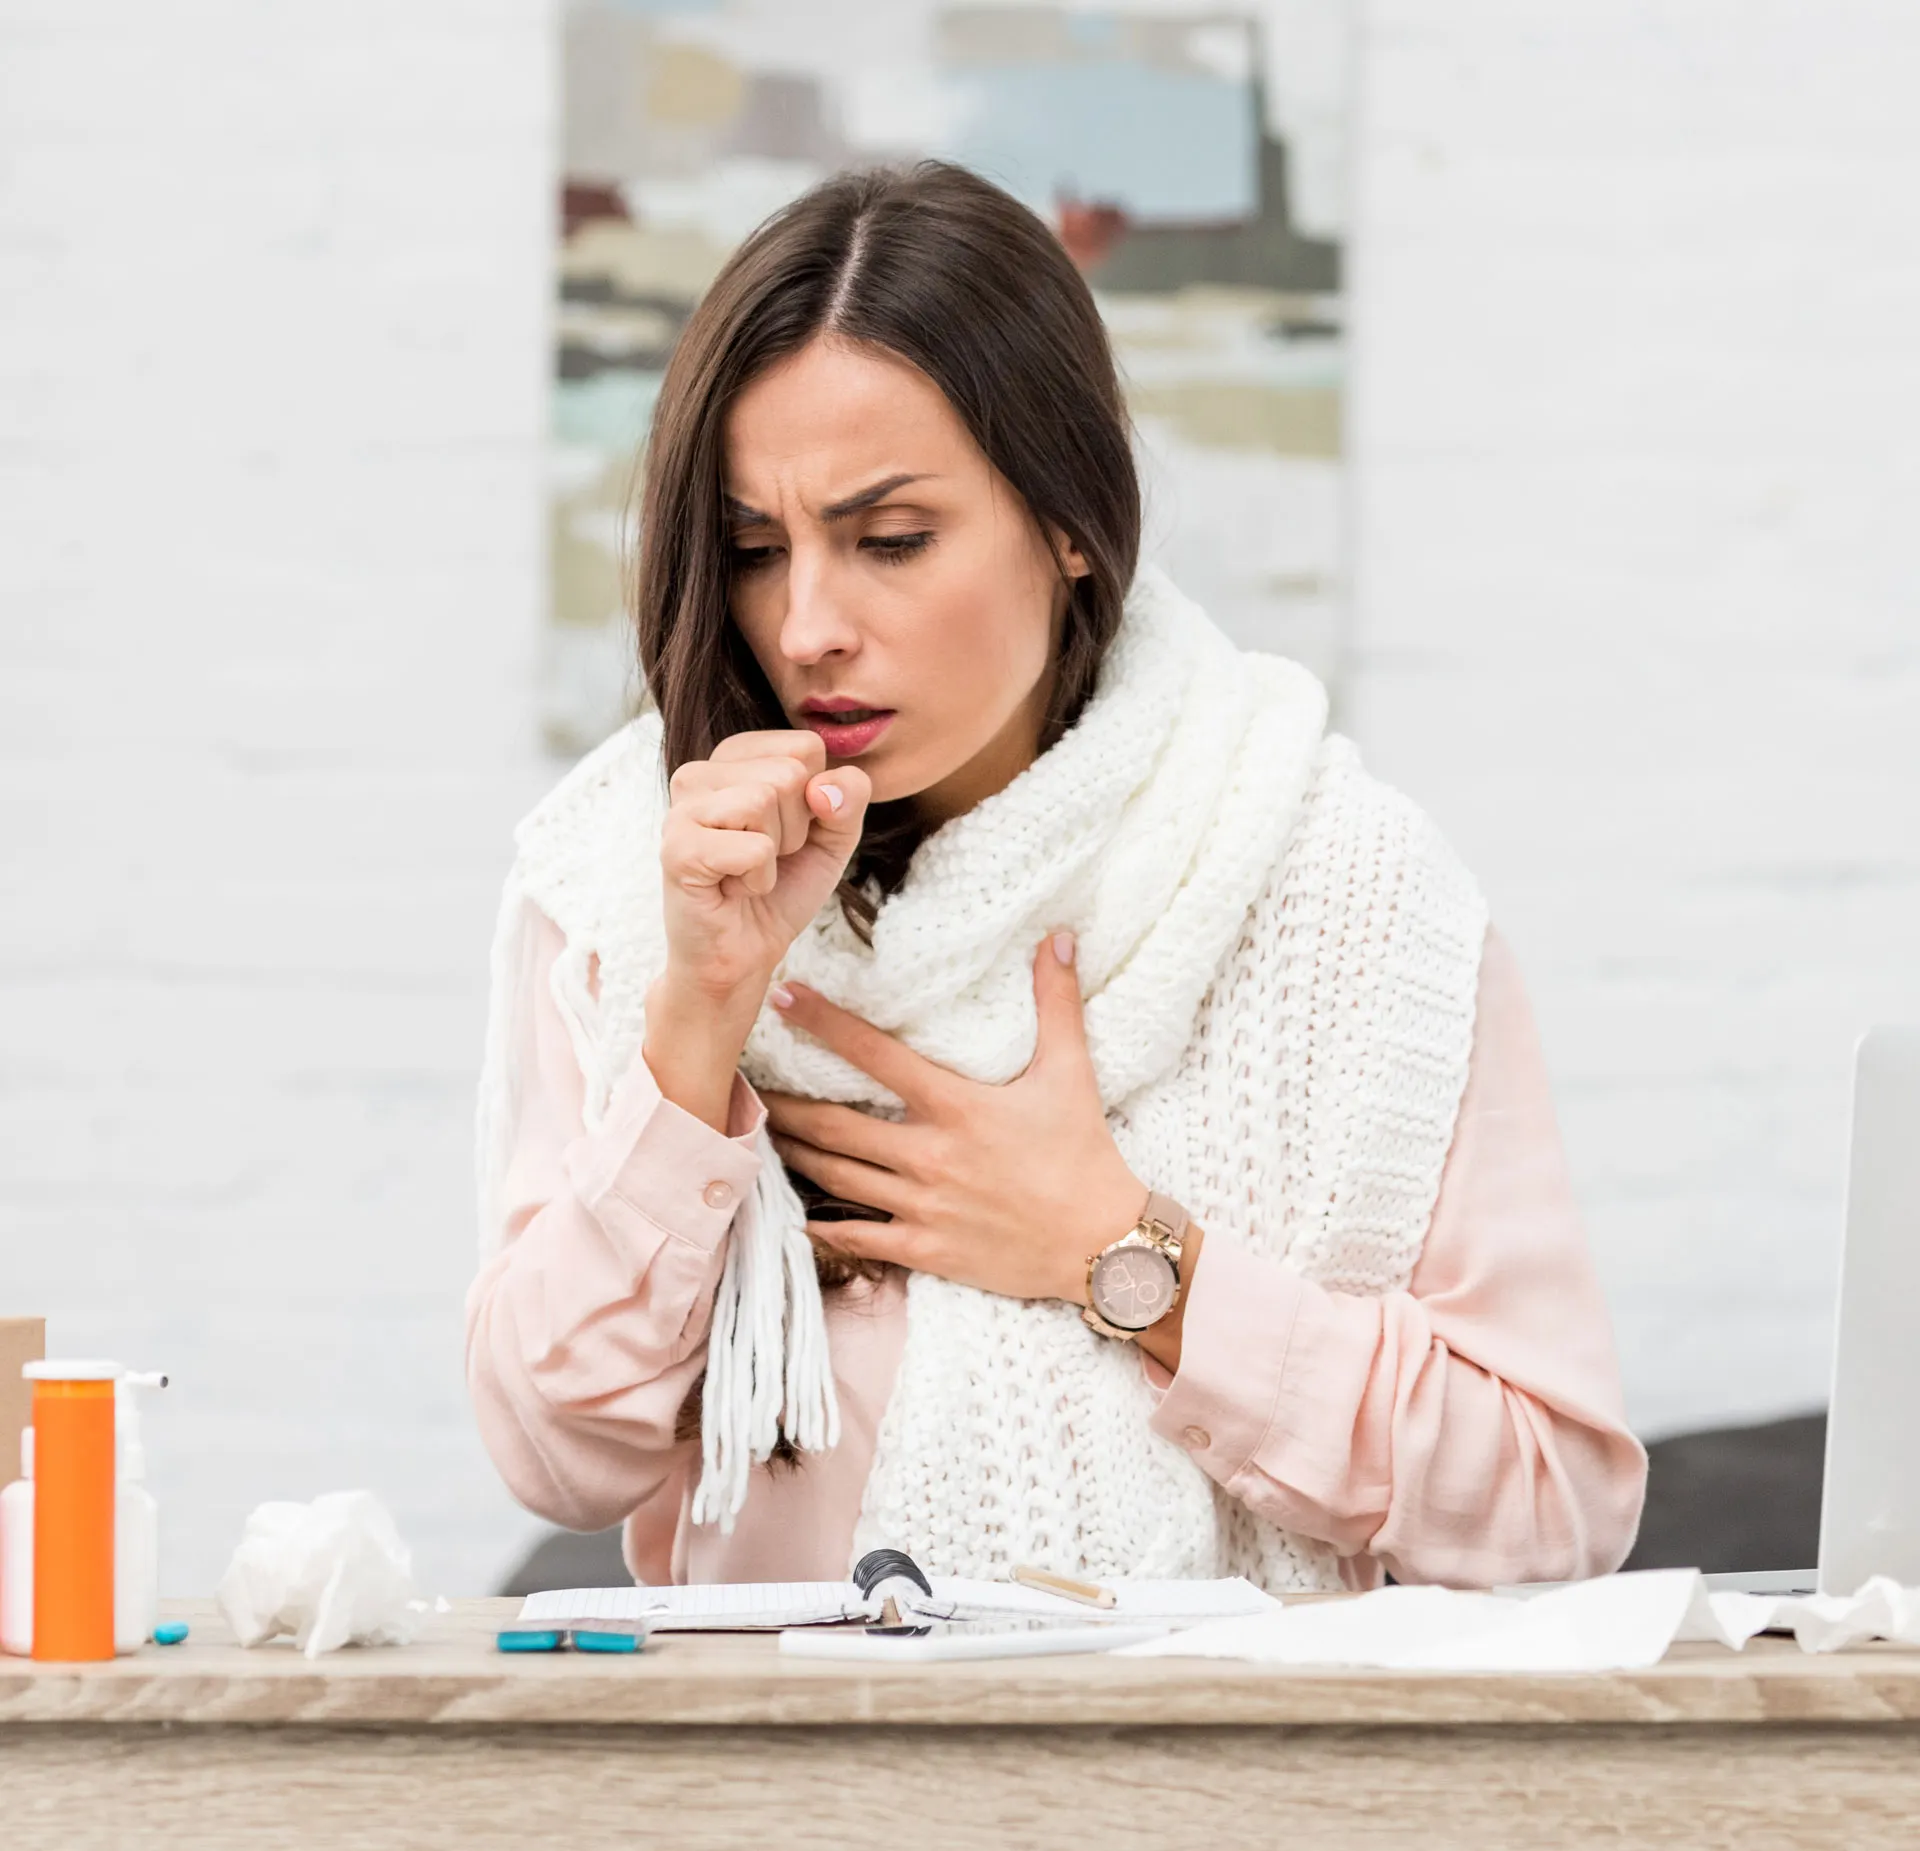 sick young businesswoman having cough at workplace 2022 12 16 16 07 52 utc 1